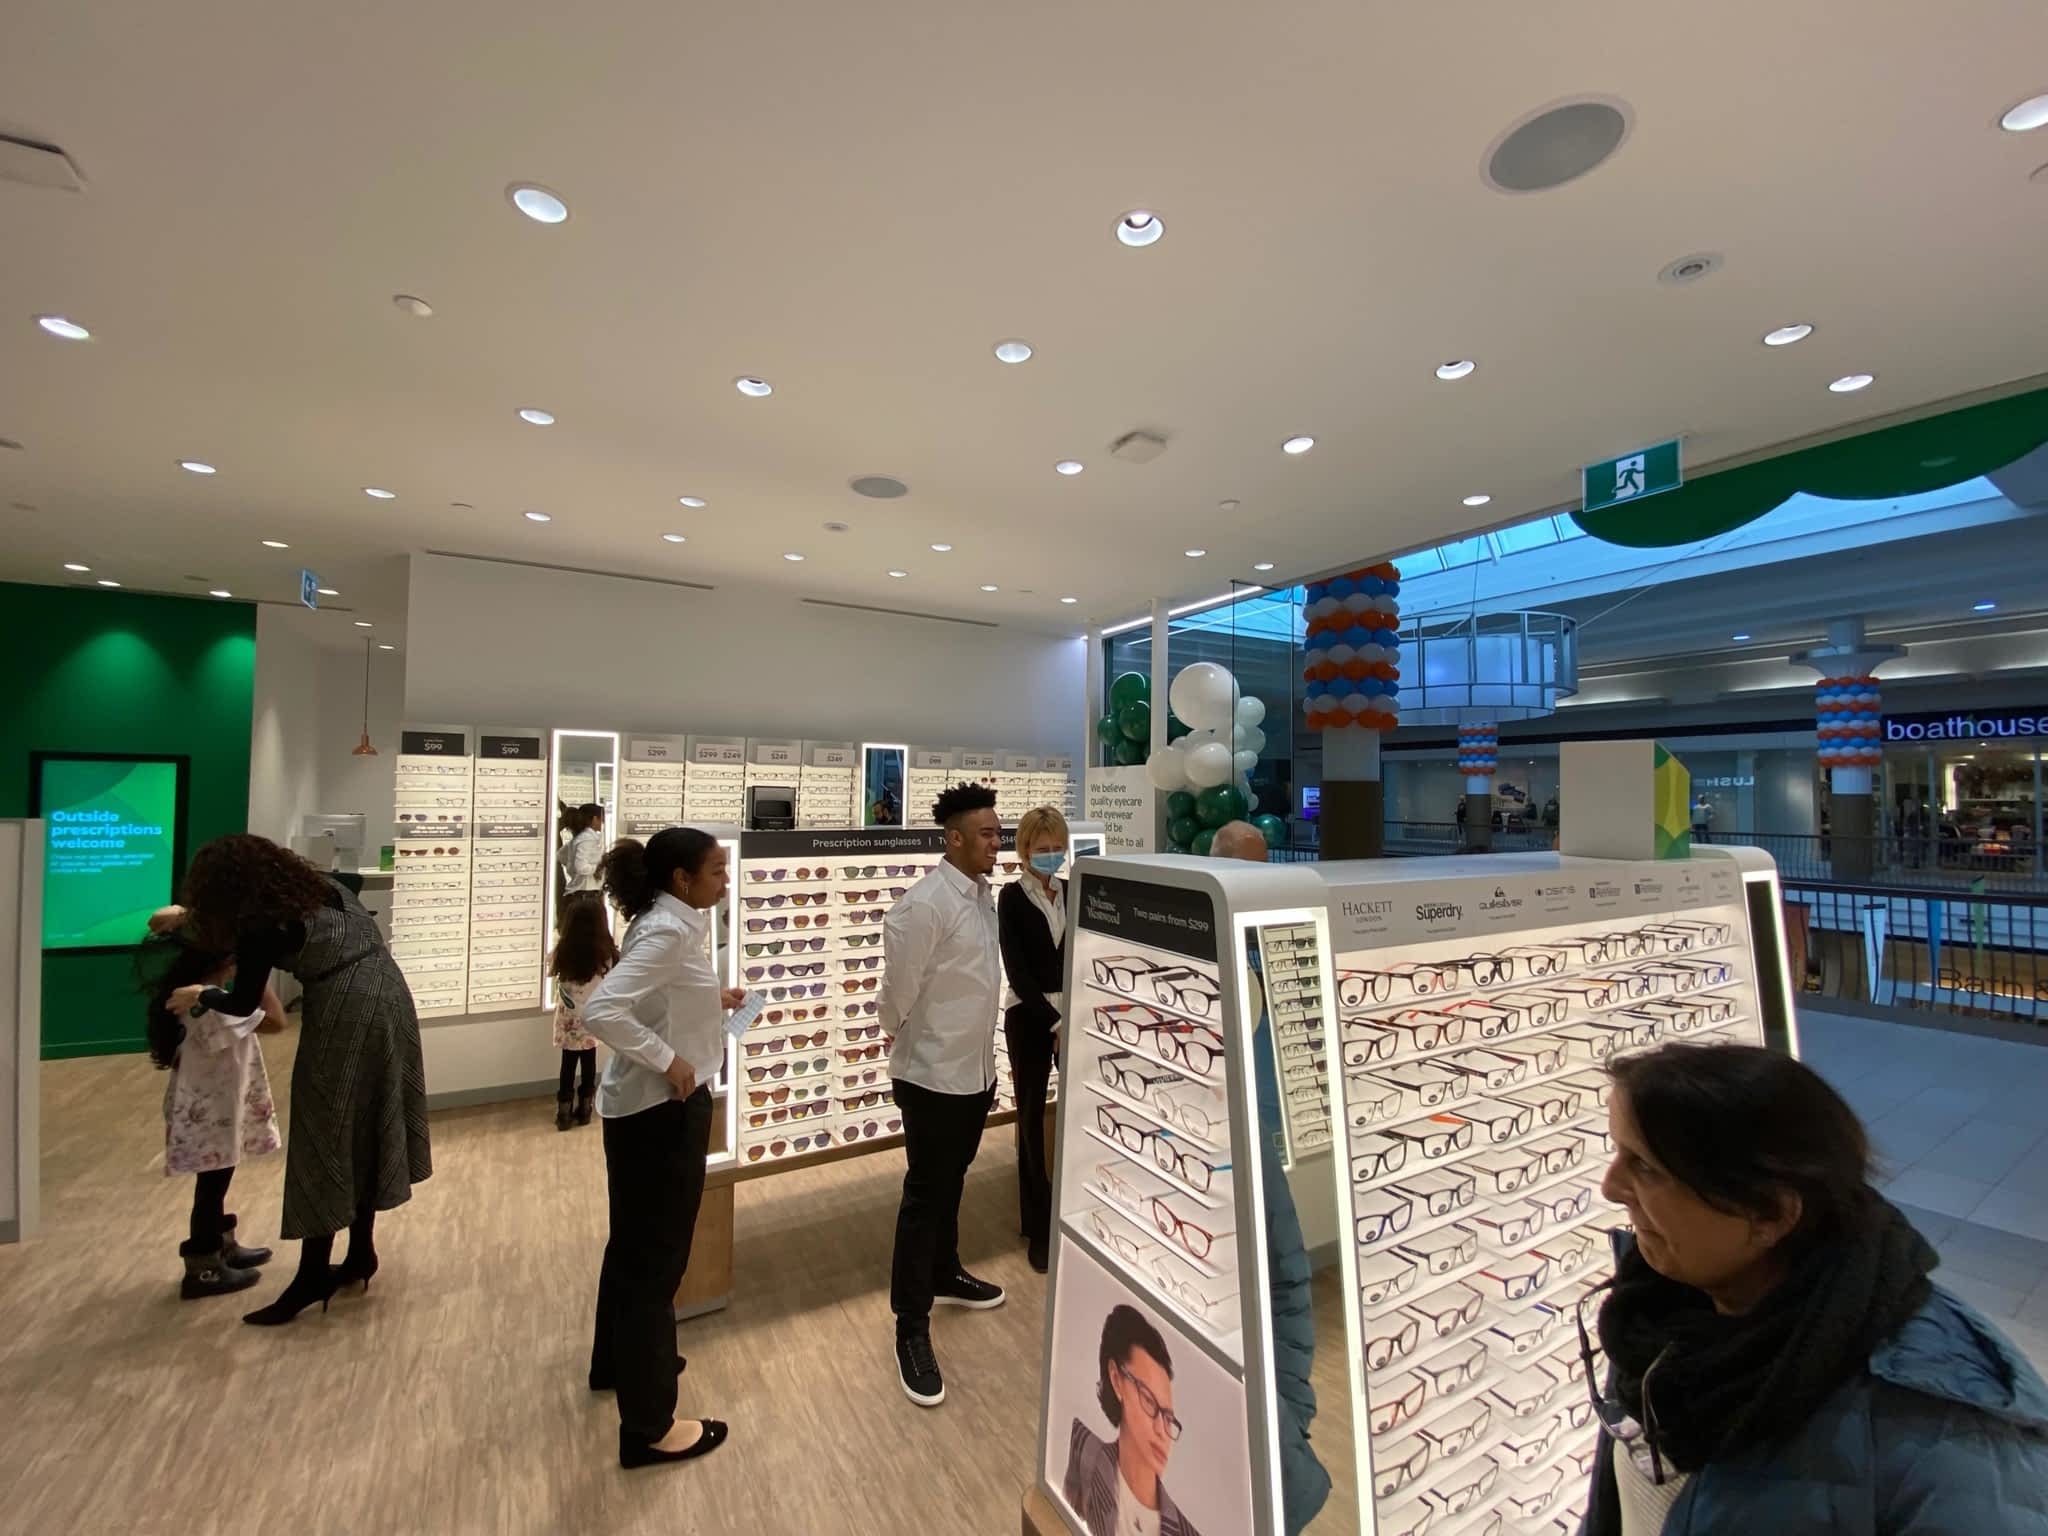 photo Specsavers Pickering Town Centre